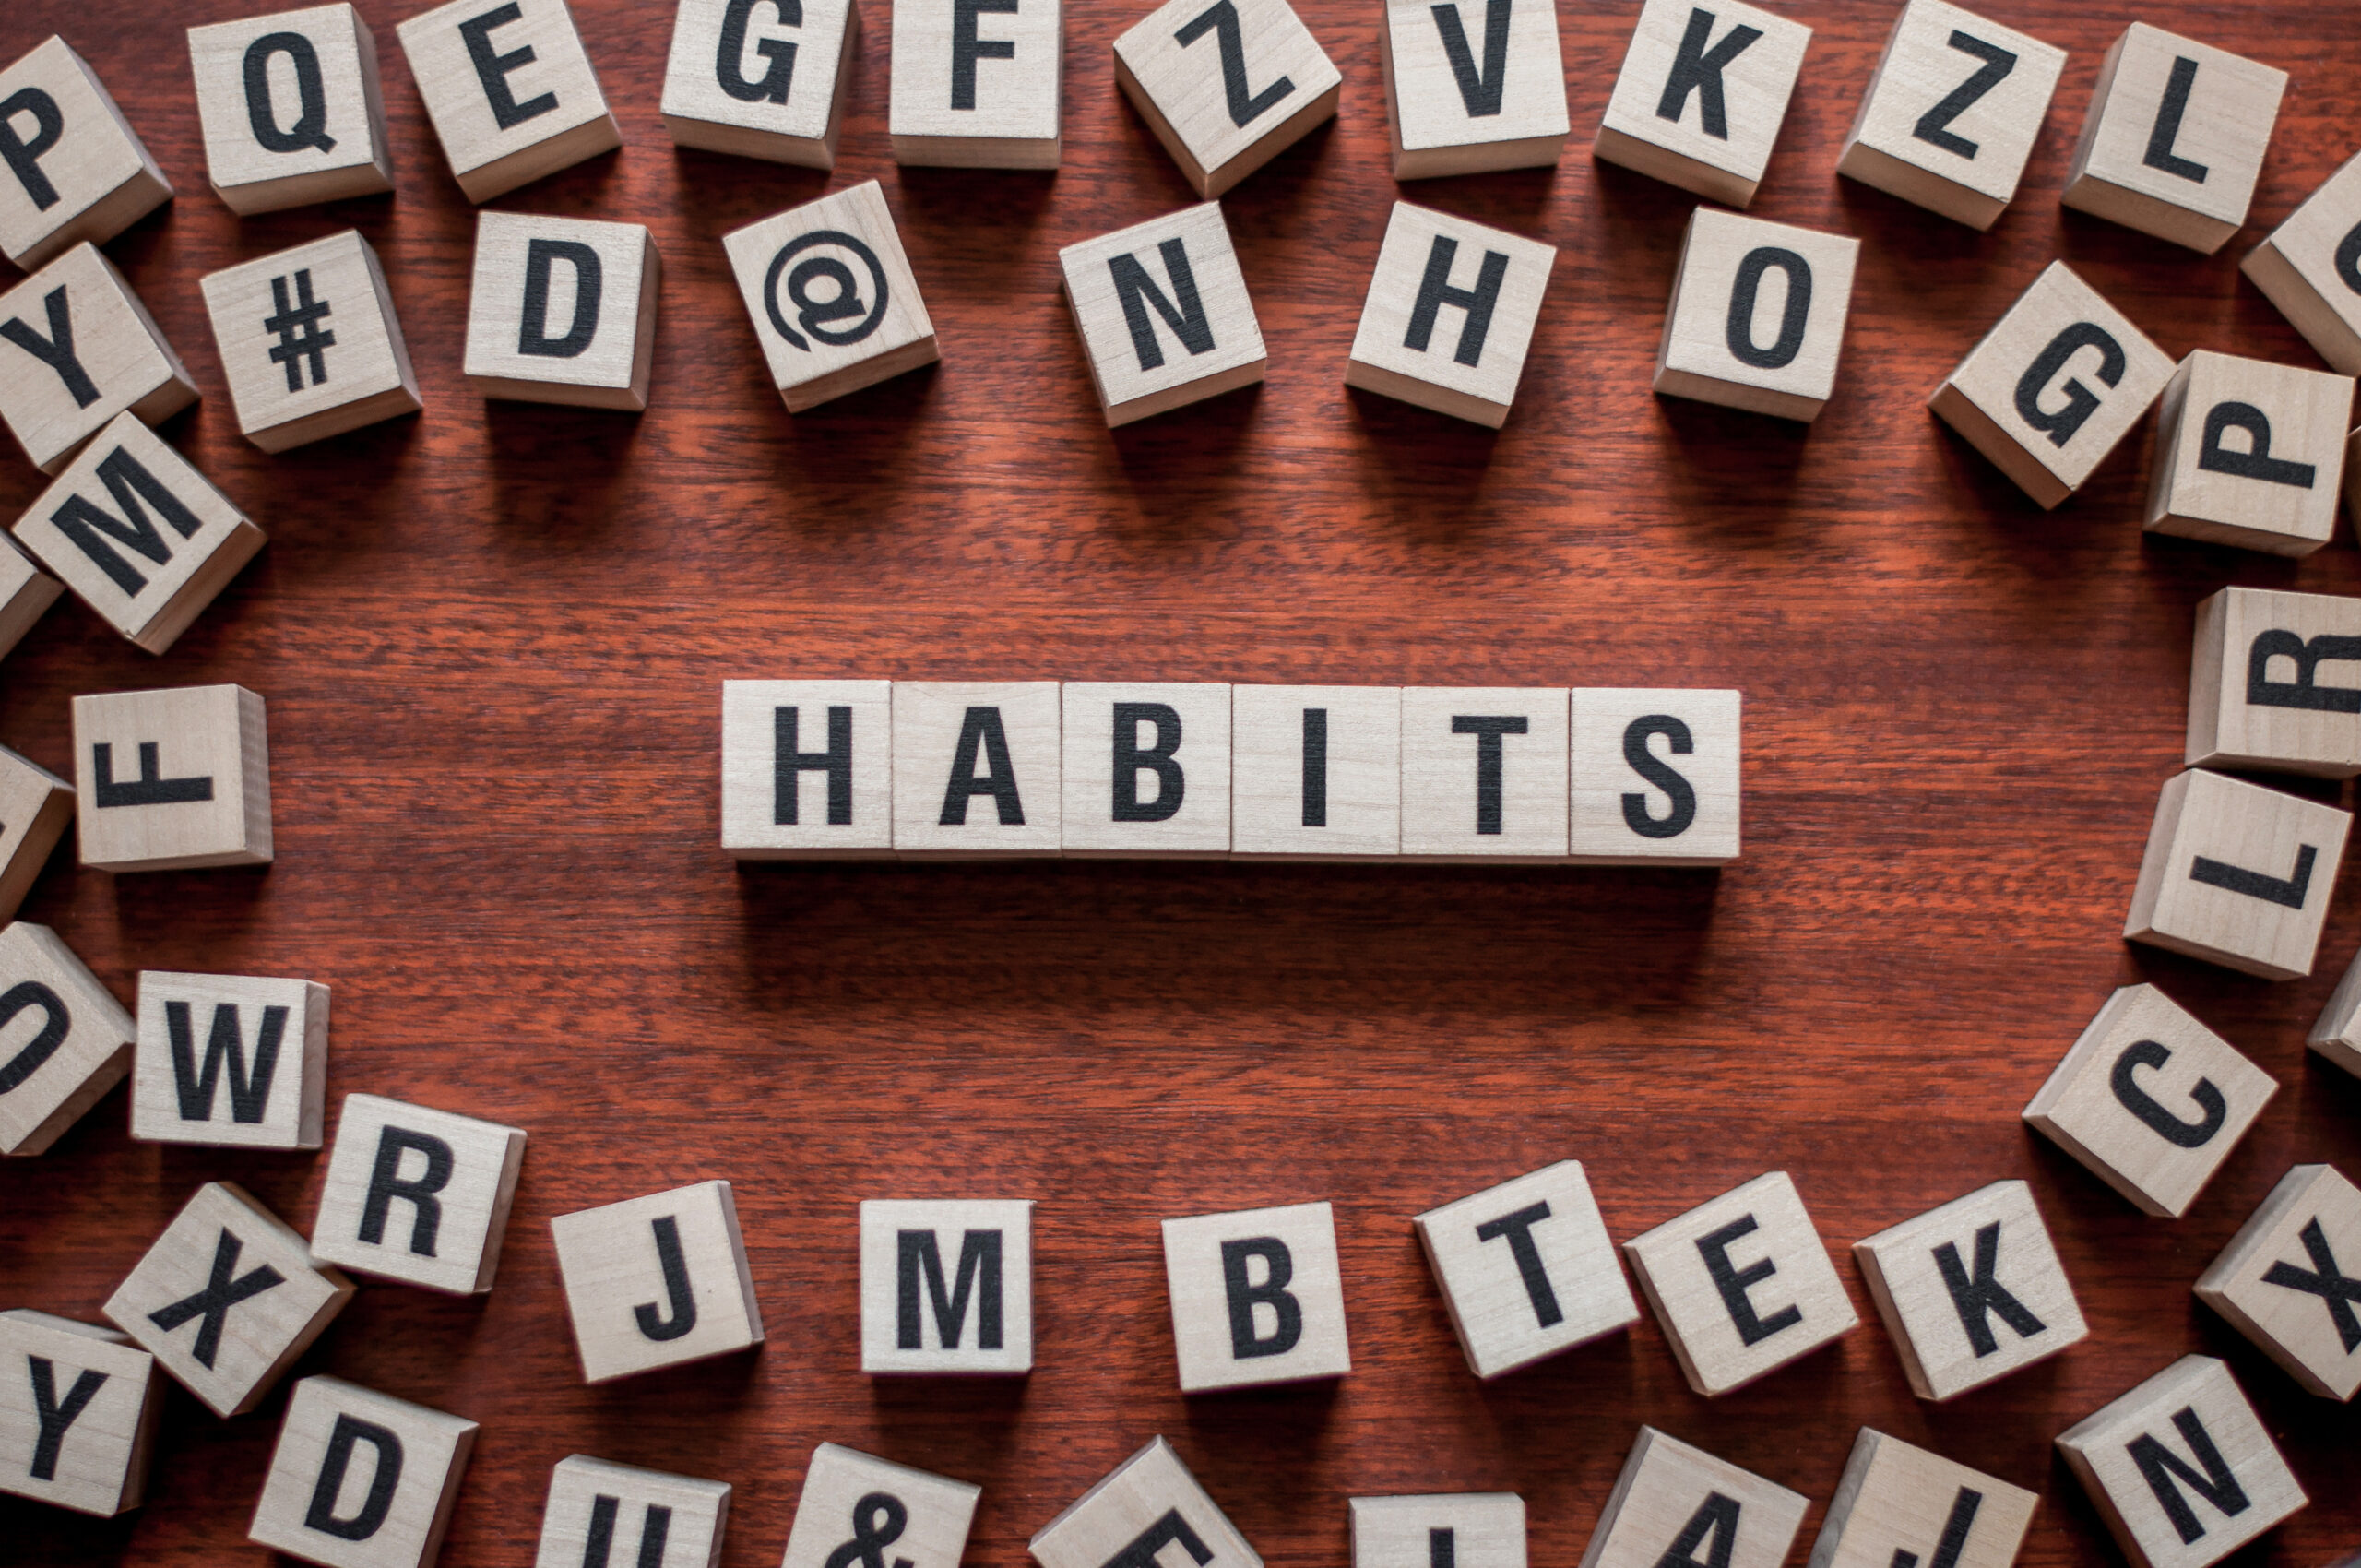 Habits word concept on cubes